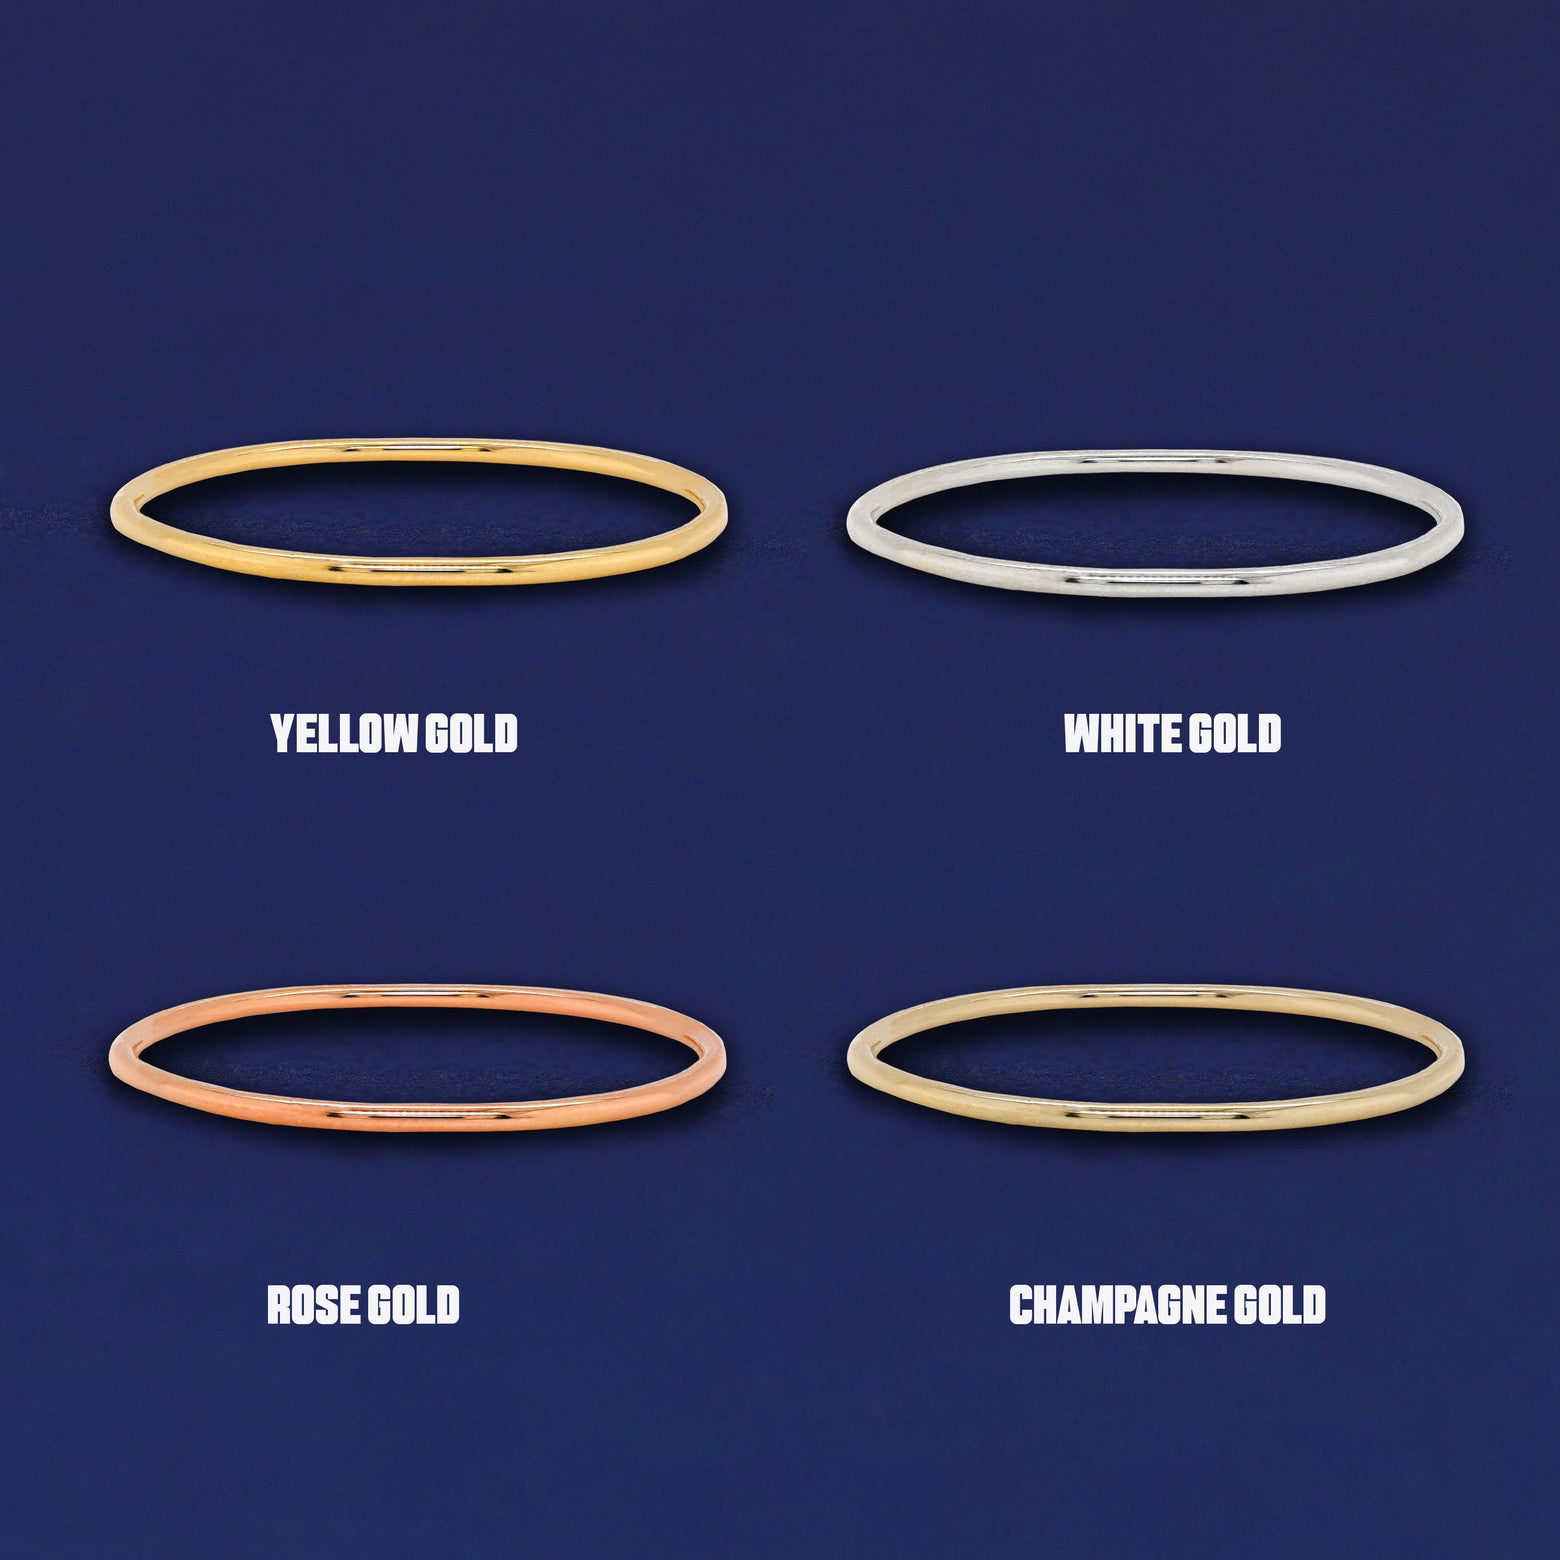 Four versions of the Line Ring shown in options of yellow, white, rose and champagne gold